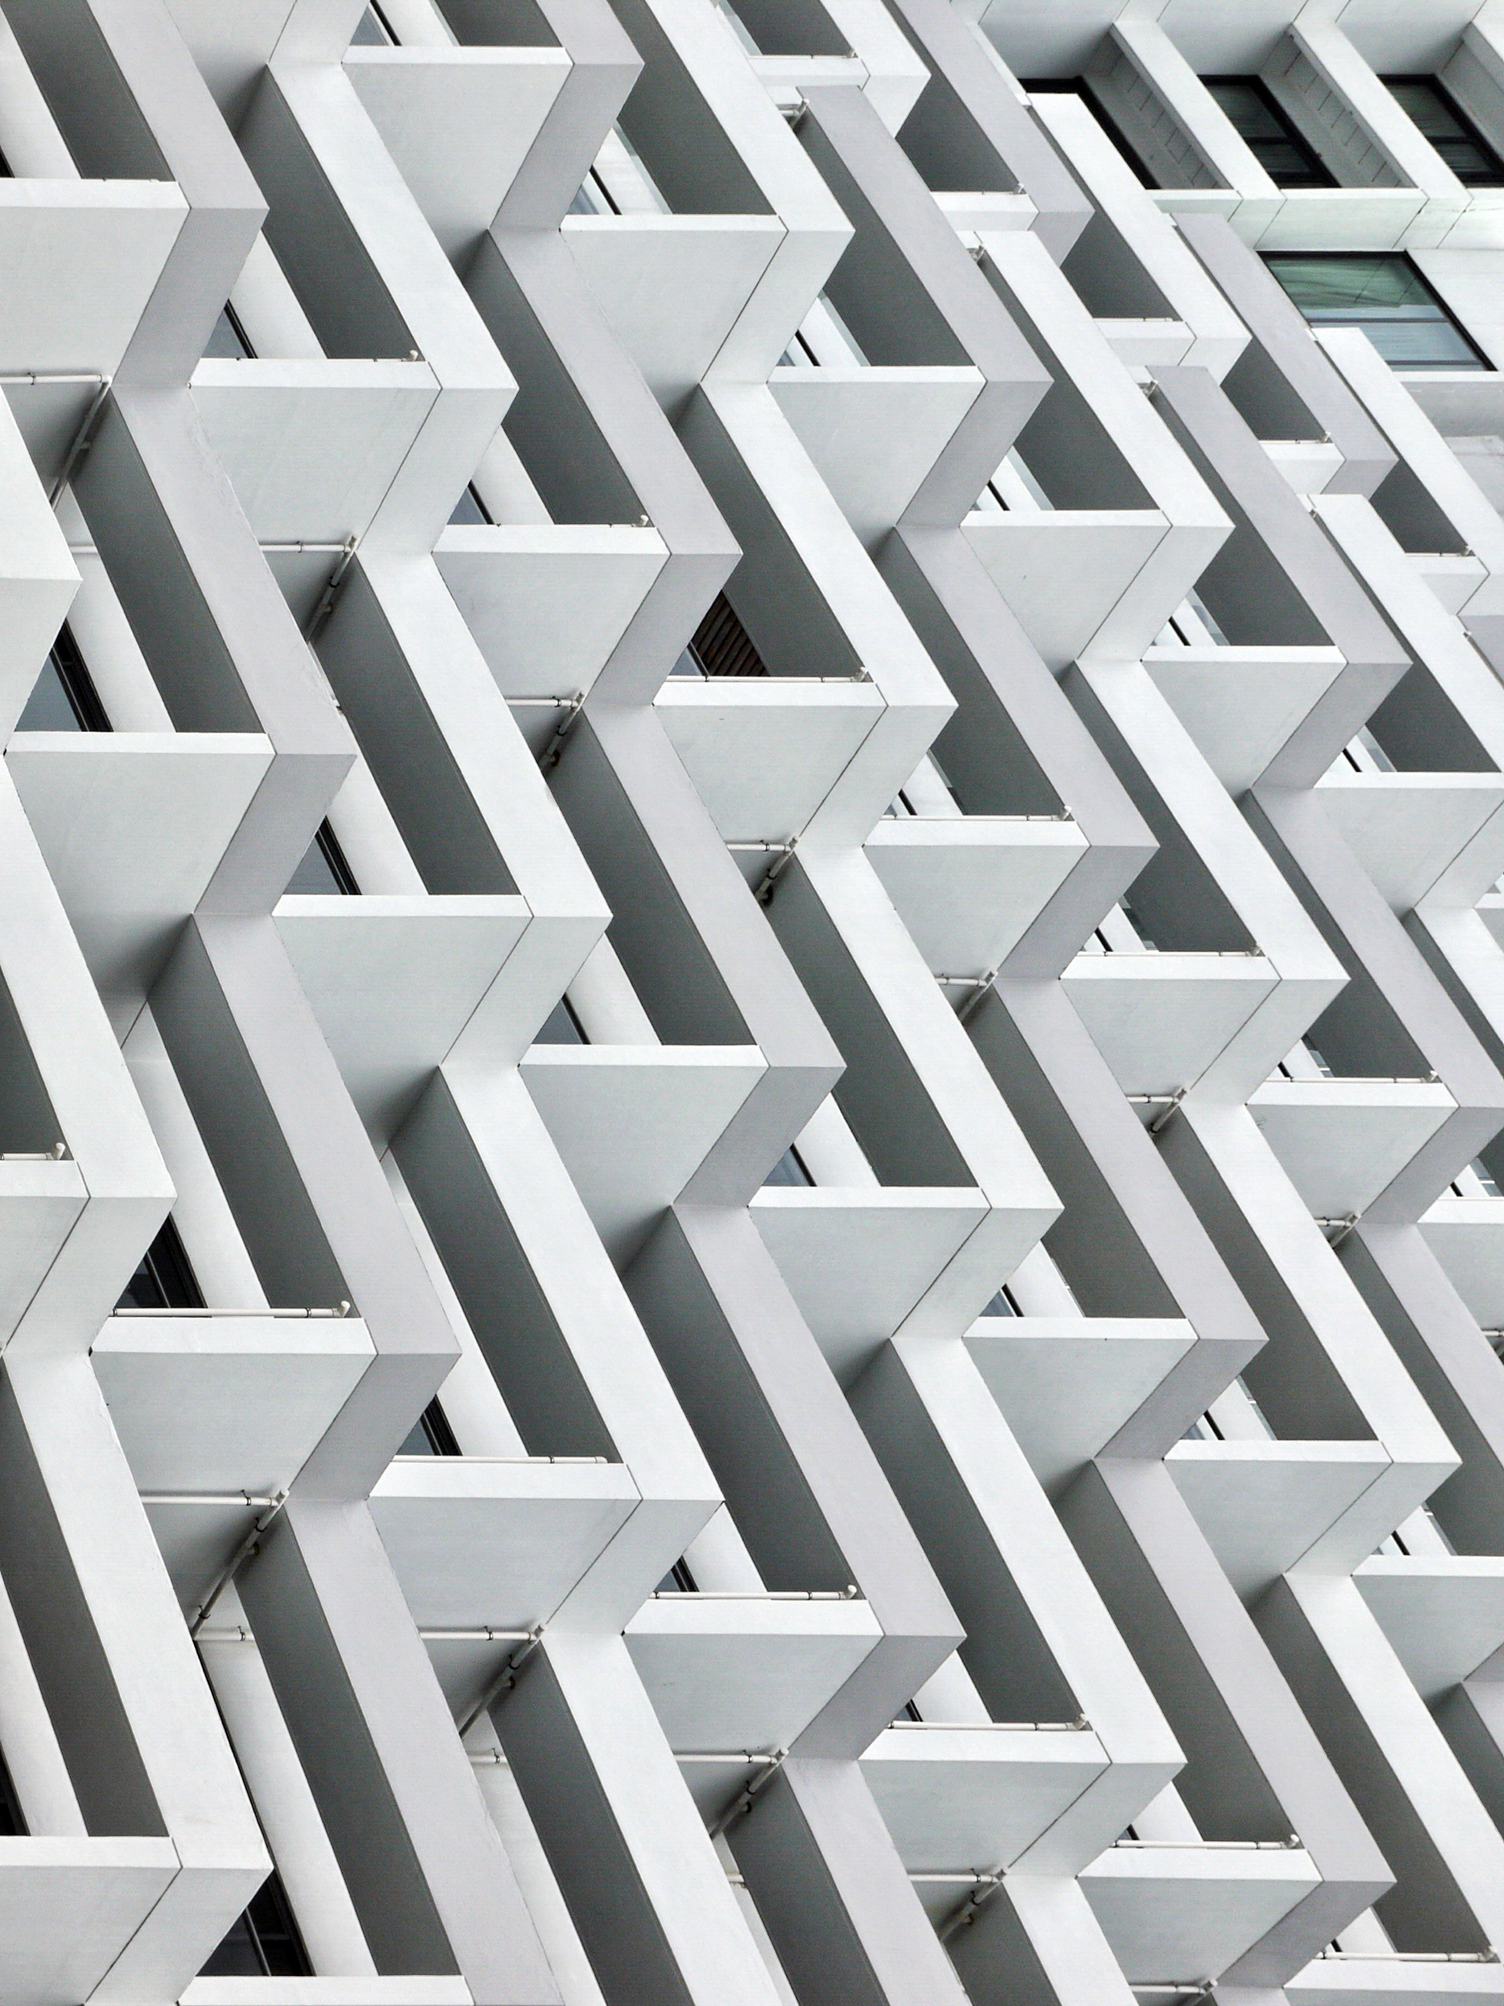 Abstract Architectural Facade Pattern